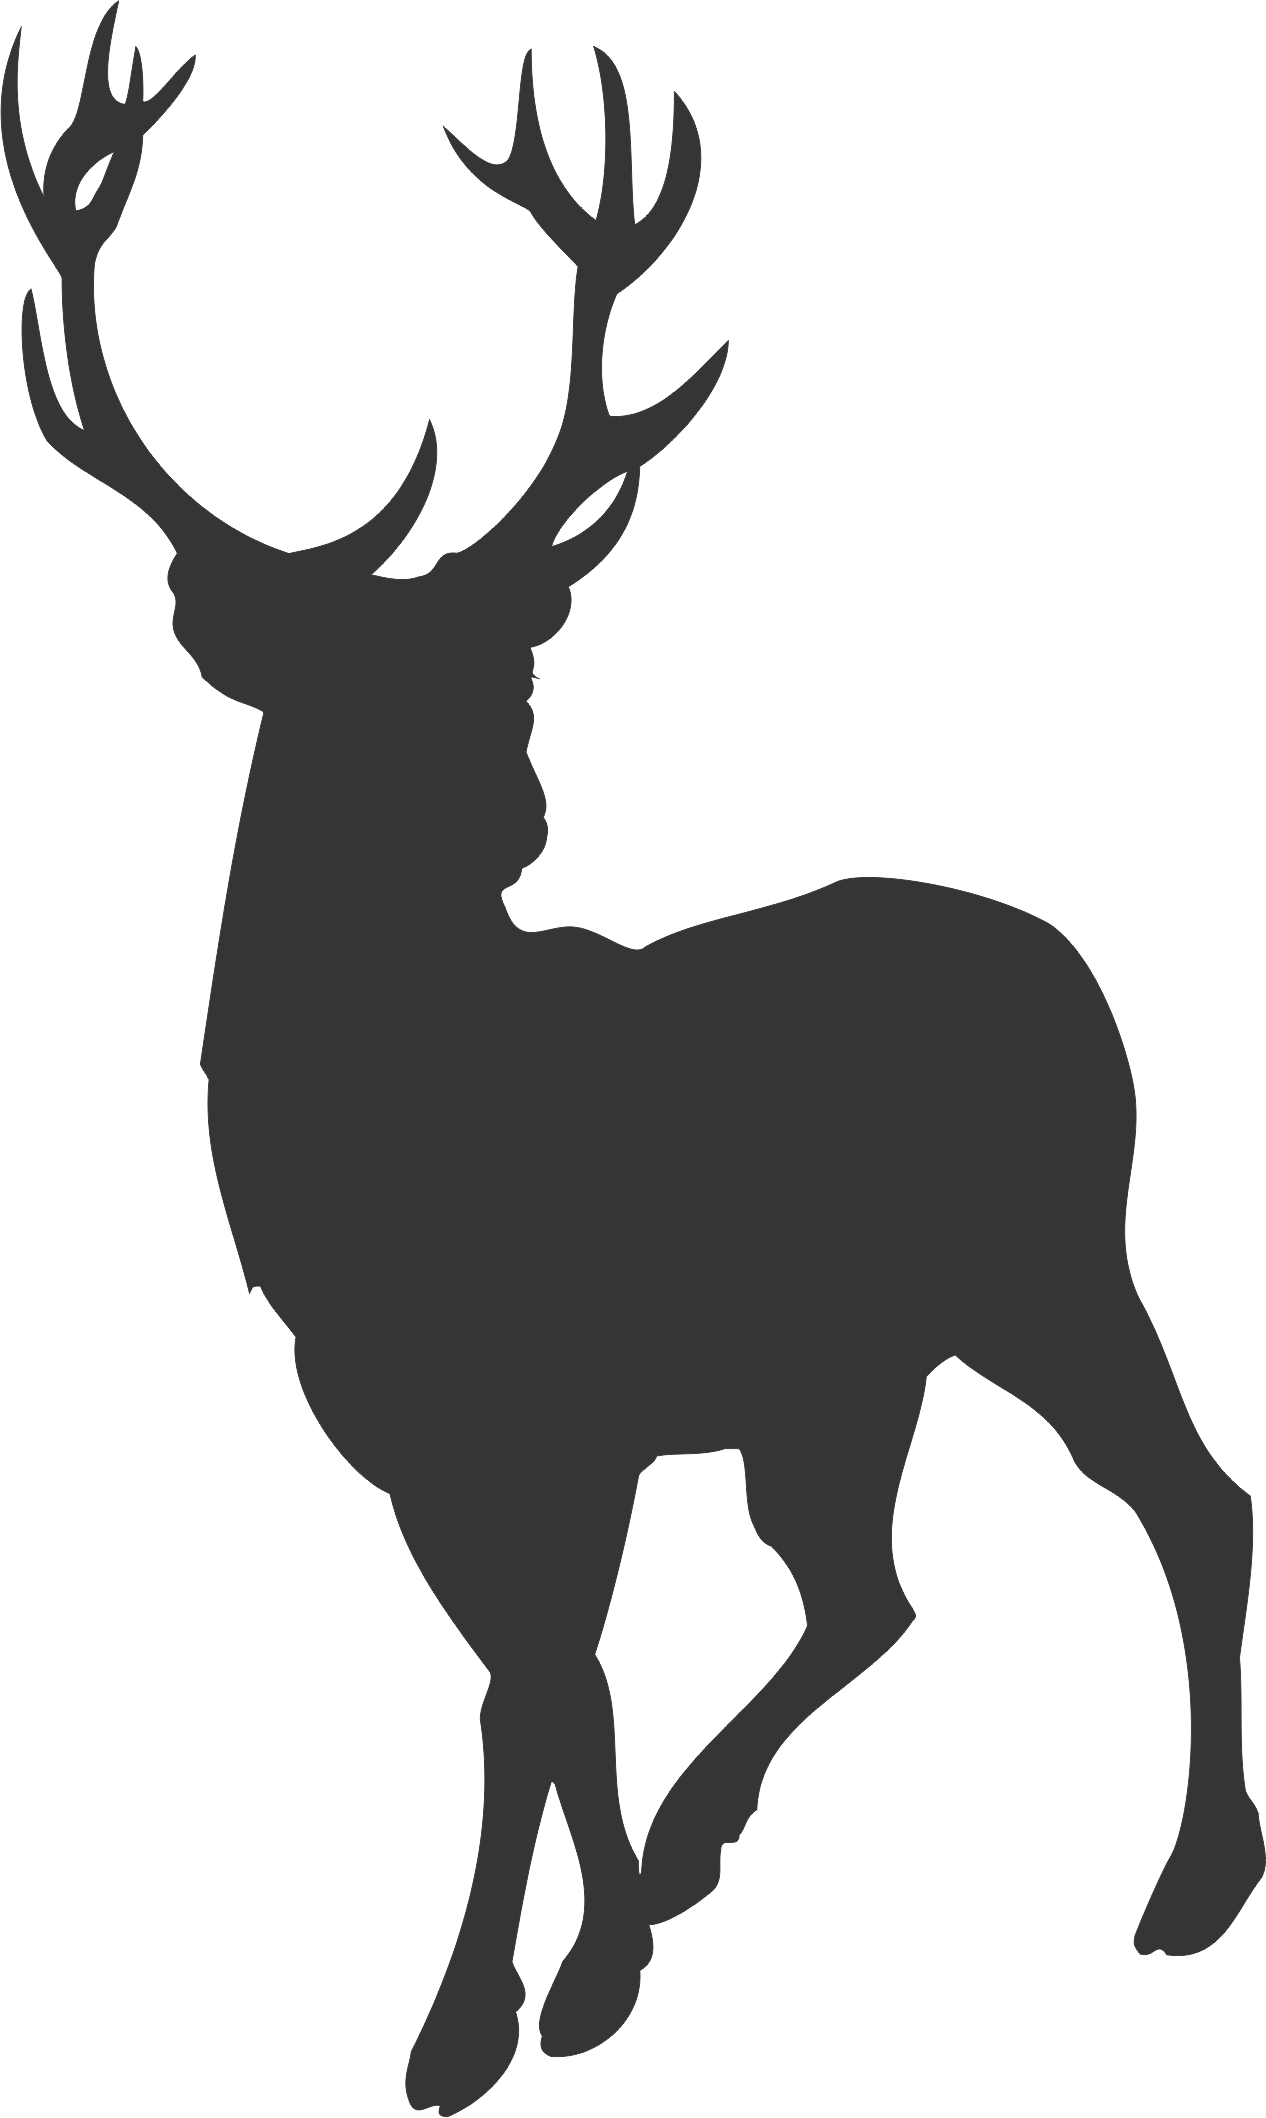 Cartoon Deer Silhouette 3 - Clipart library - Clipart library